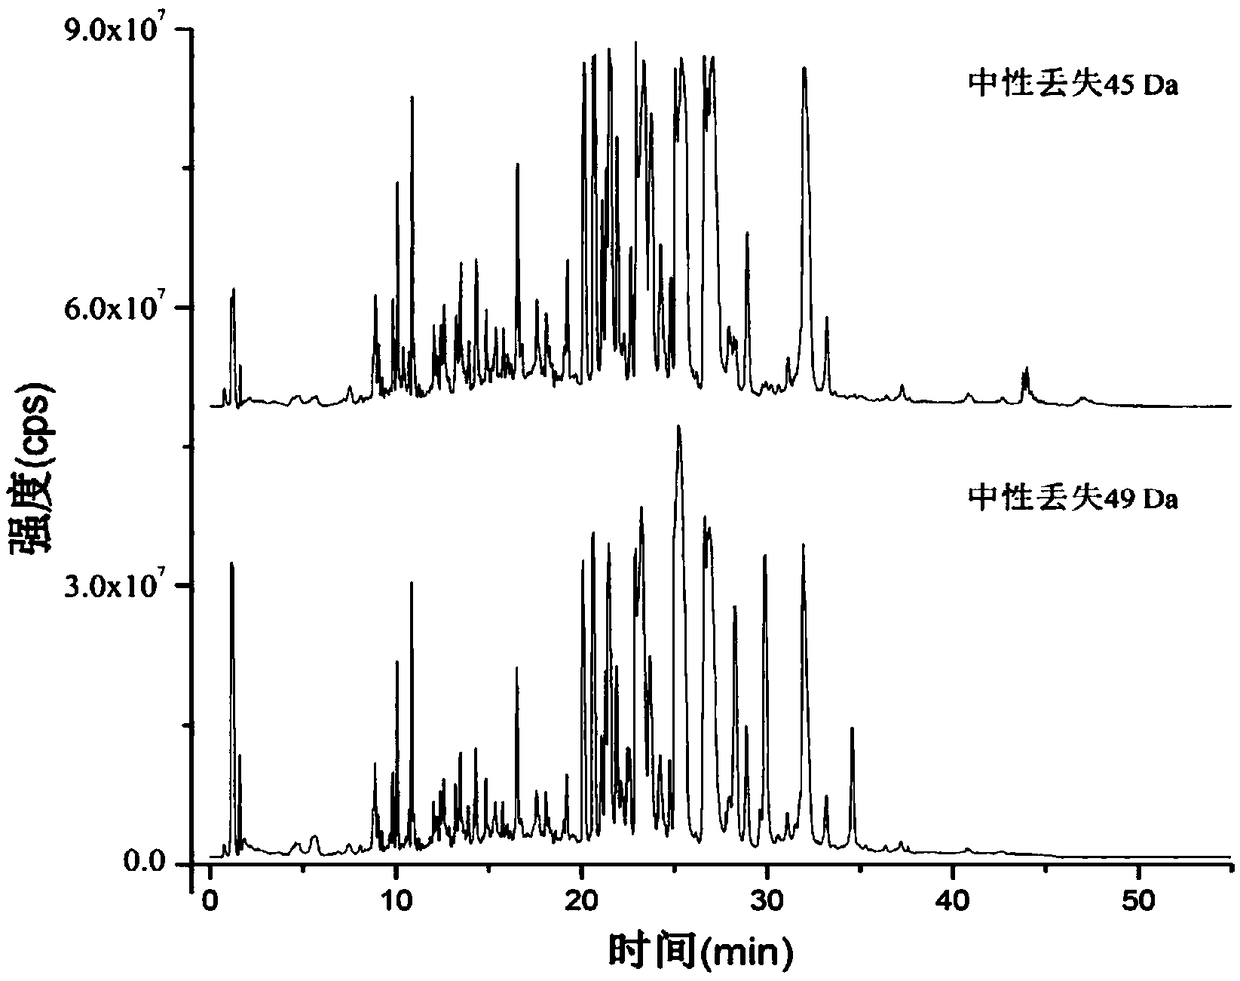 Method for detecting carboxylic acid metabolites in plasma by using gas chromatography-mass spectrometry based on stable isotope labeling